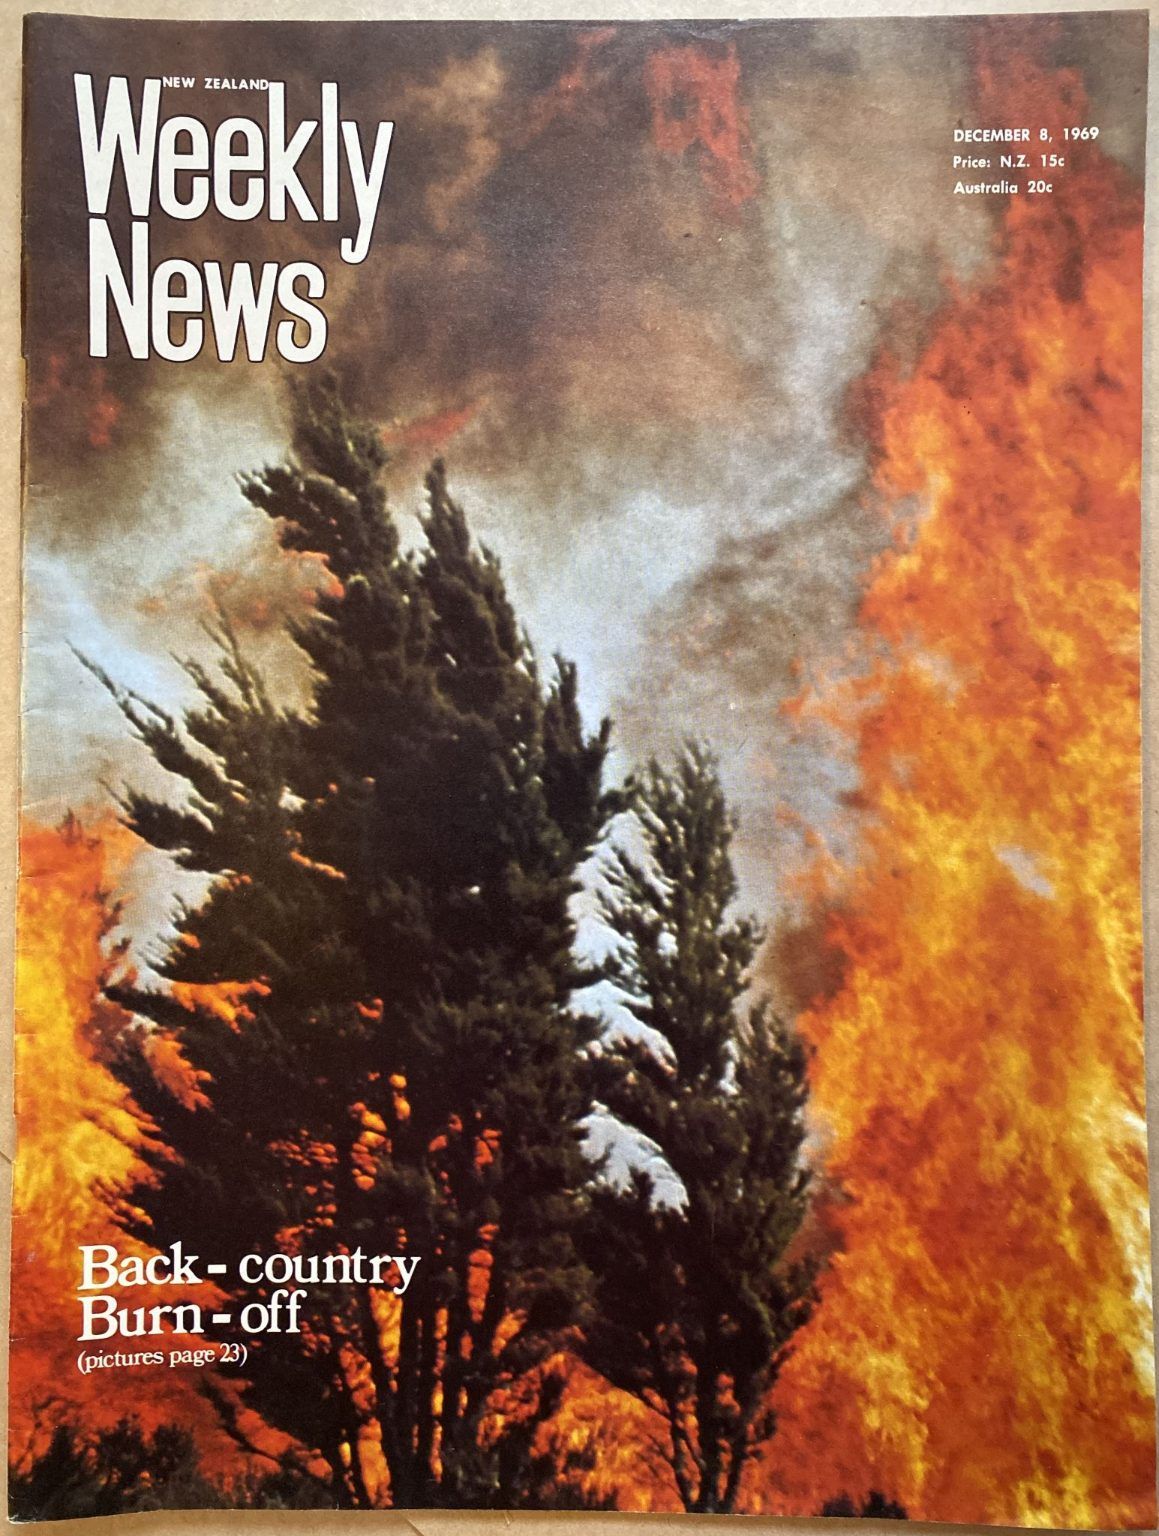 OLD NEWSPAPER: New Zealand Weekly News, No. 5532, 8 December 1969